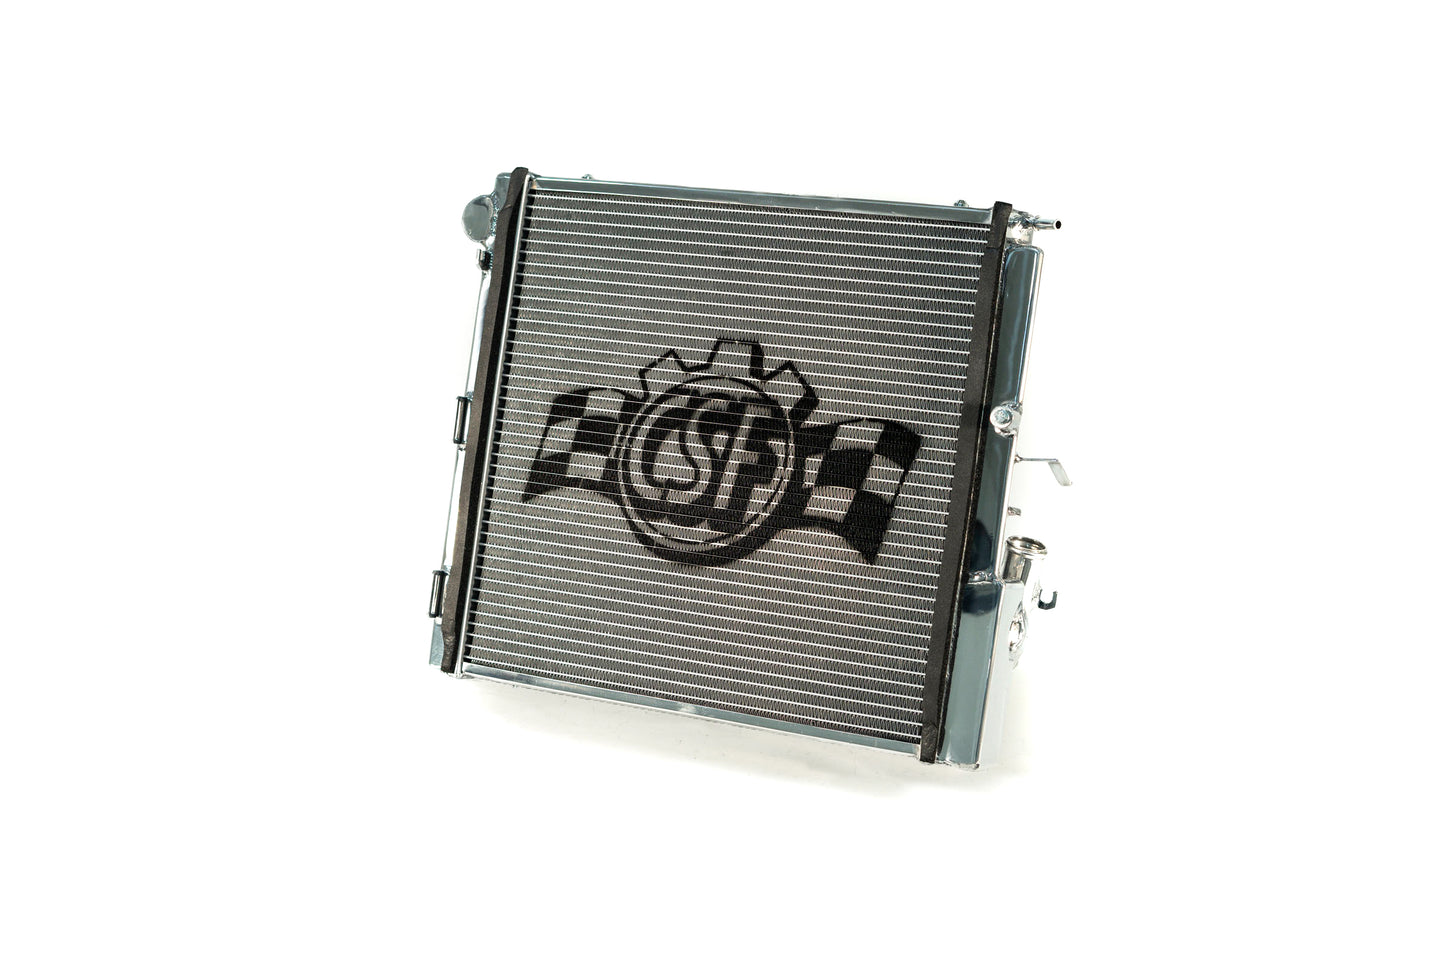 CSF Race Radiator for Porsche 911 Carrera (991.2), 911 Turbo (991), 991 GT3, 991 GT3RS, 991 CUP - Right Side Only